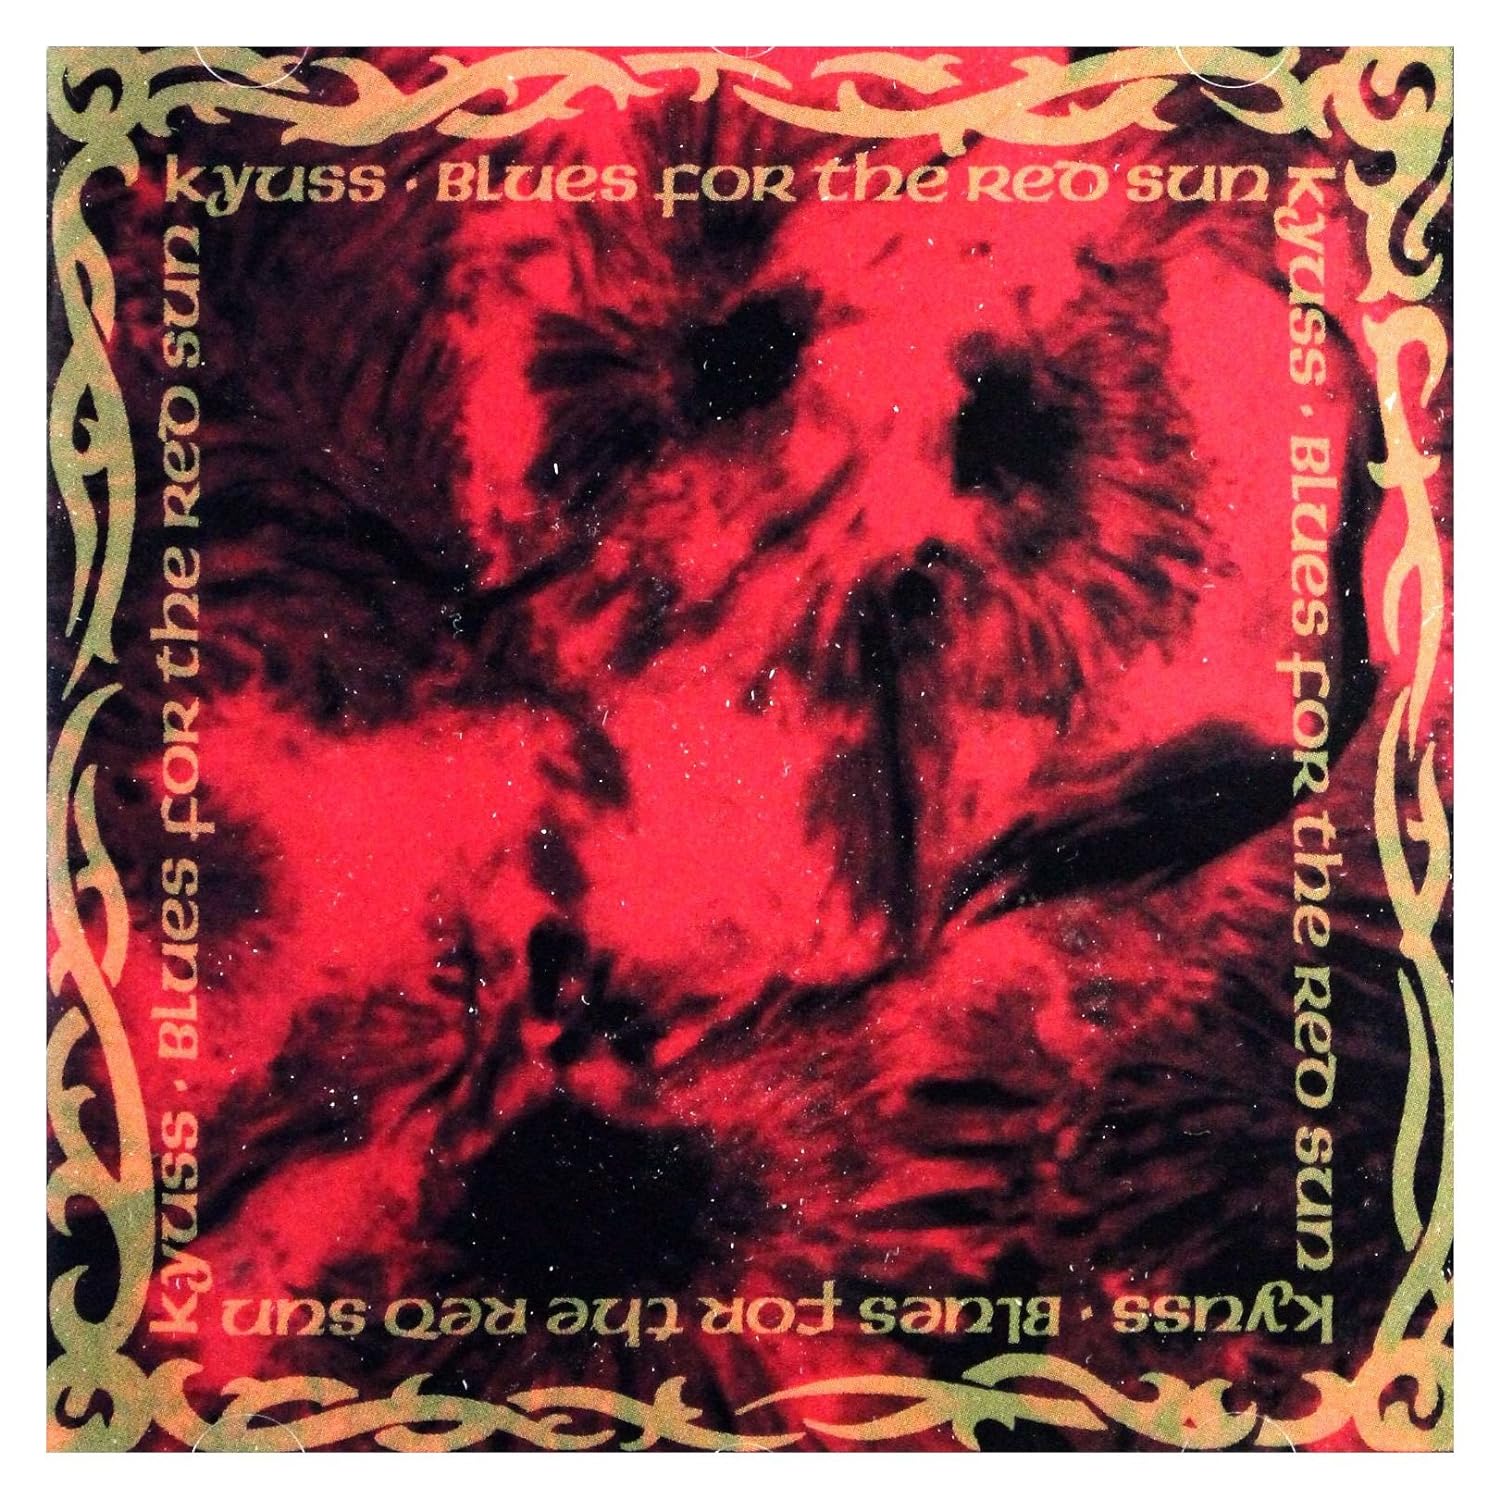 KYUSS - BLUES FOR THE RED SUN LIMITED RED VINYL